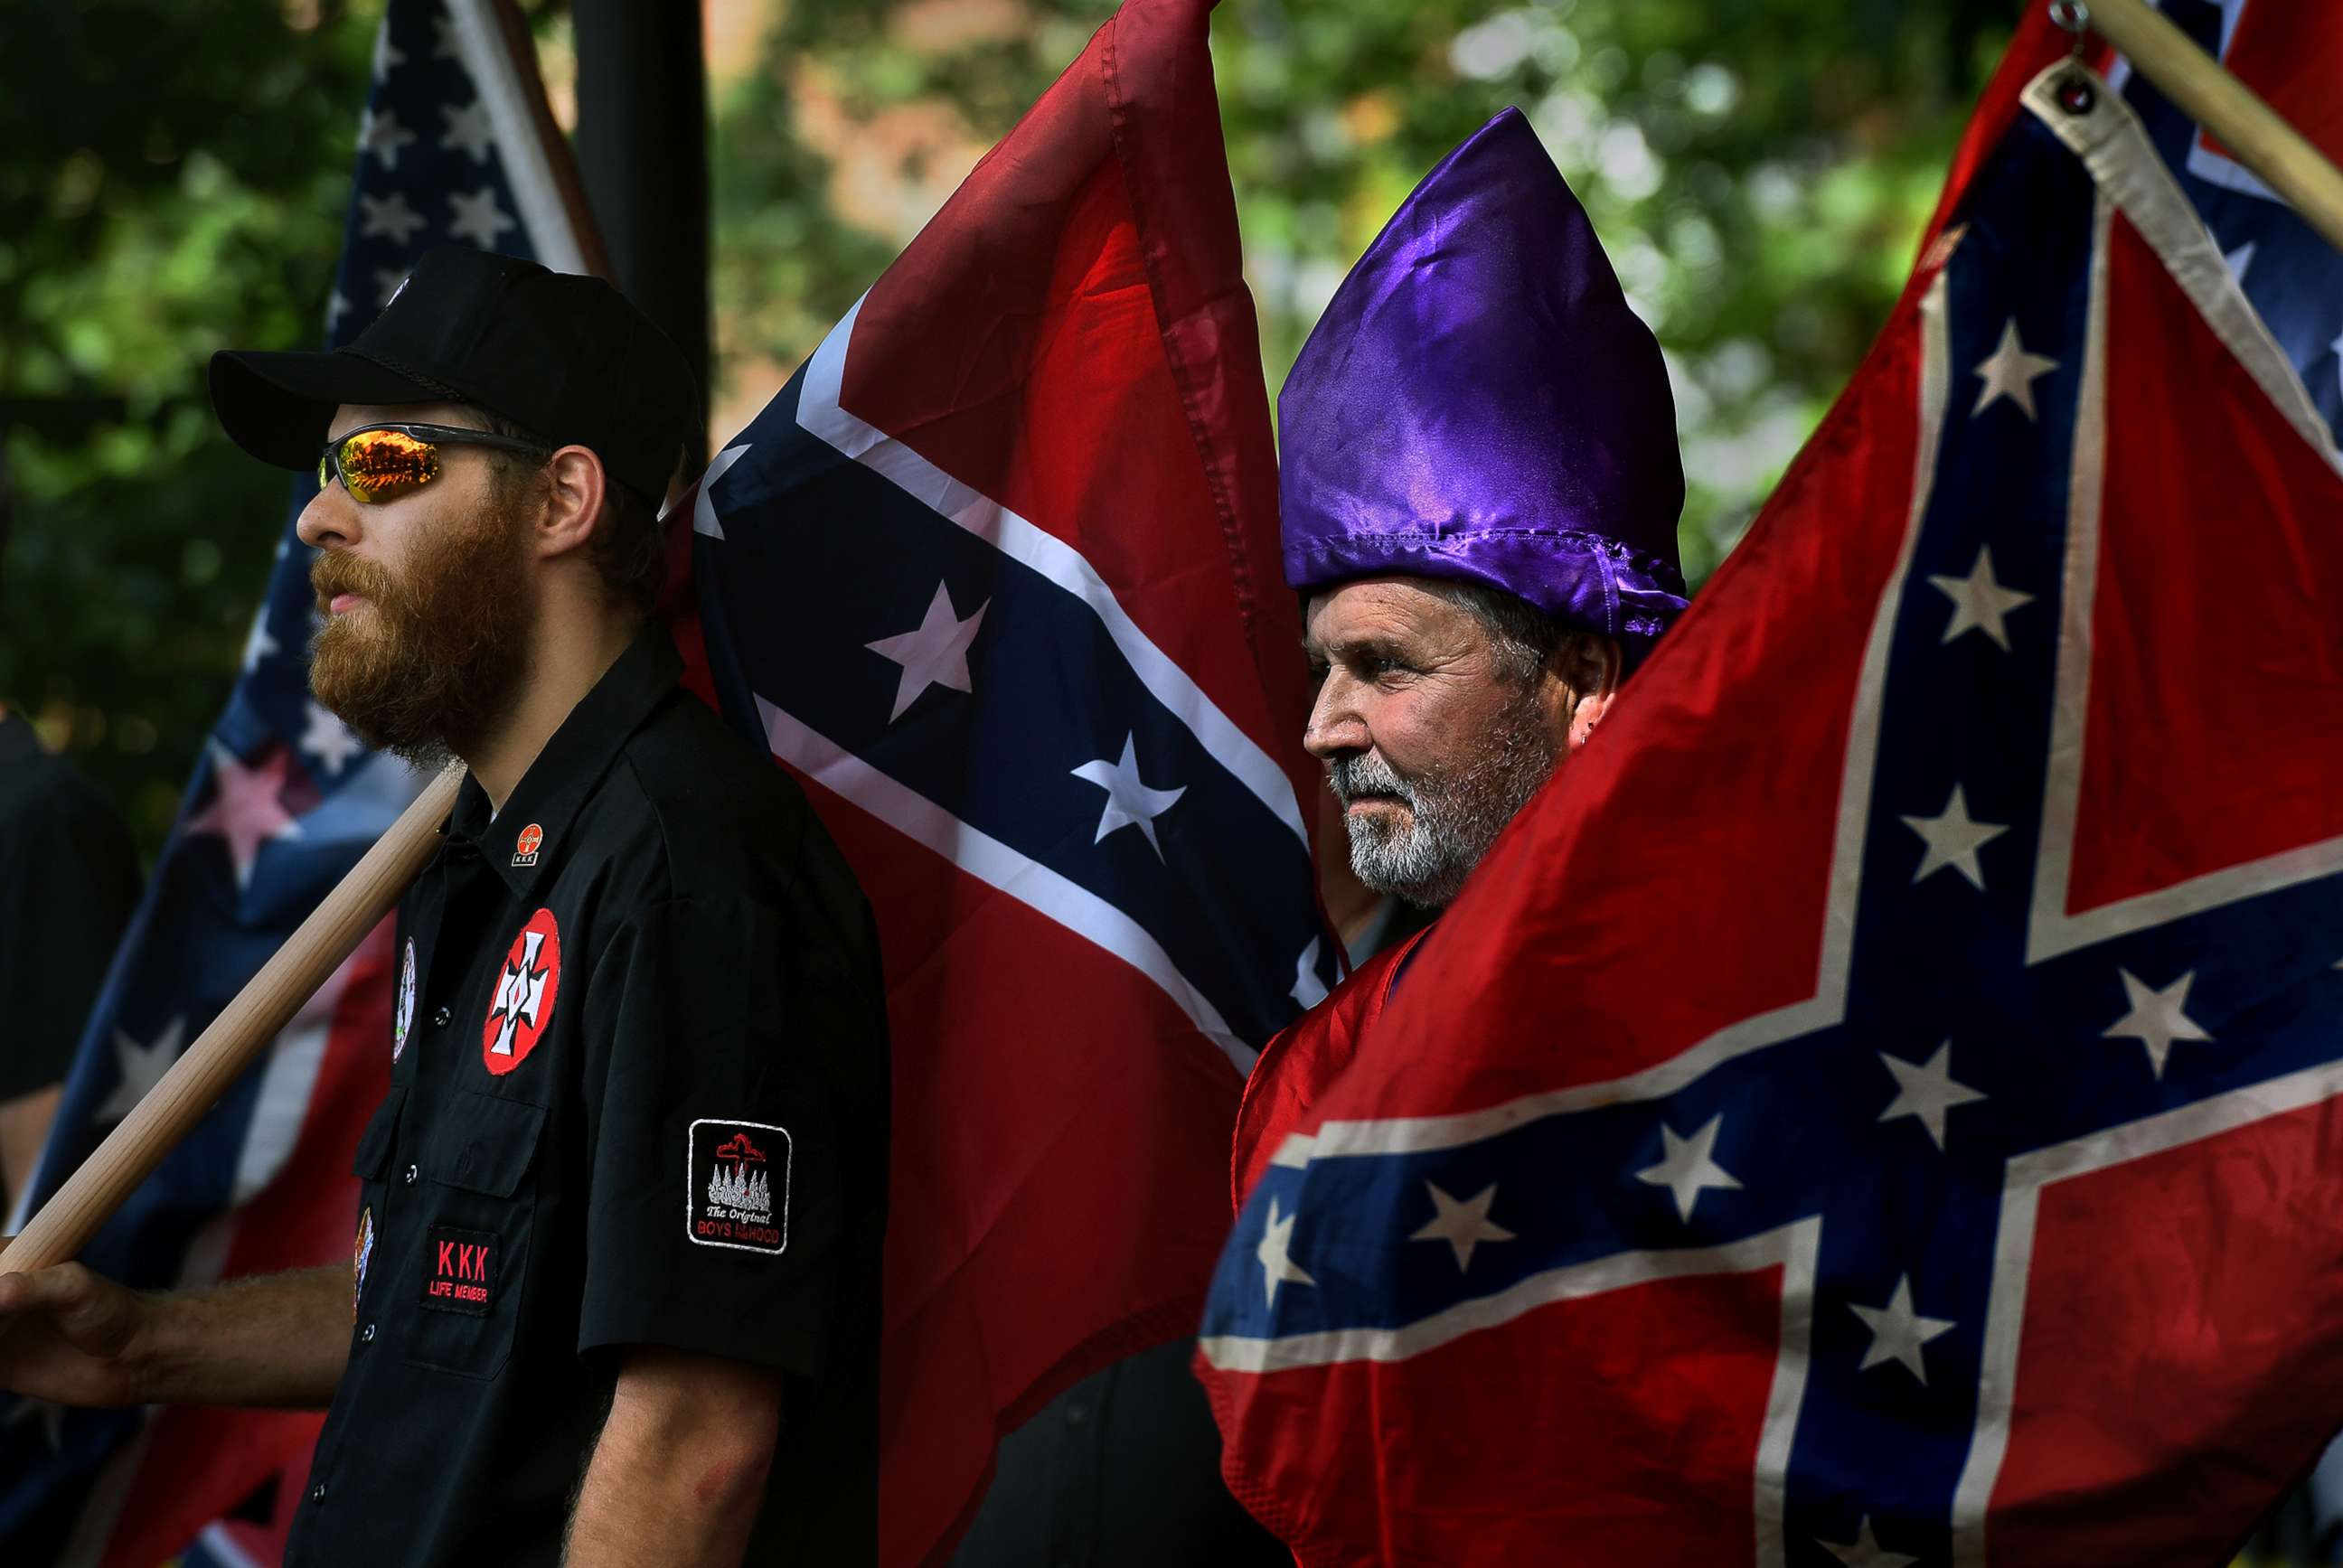 PHOTO: KKK members gathered at a park in Charlottesville, Va., July 8, 2017, to protest a city action that would affect Civil War memorials in city parks.